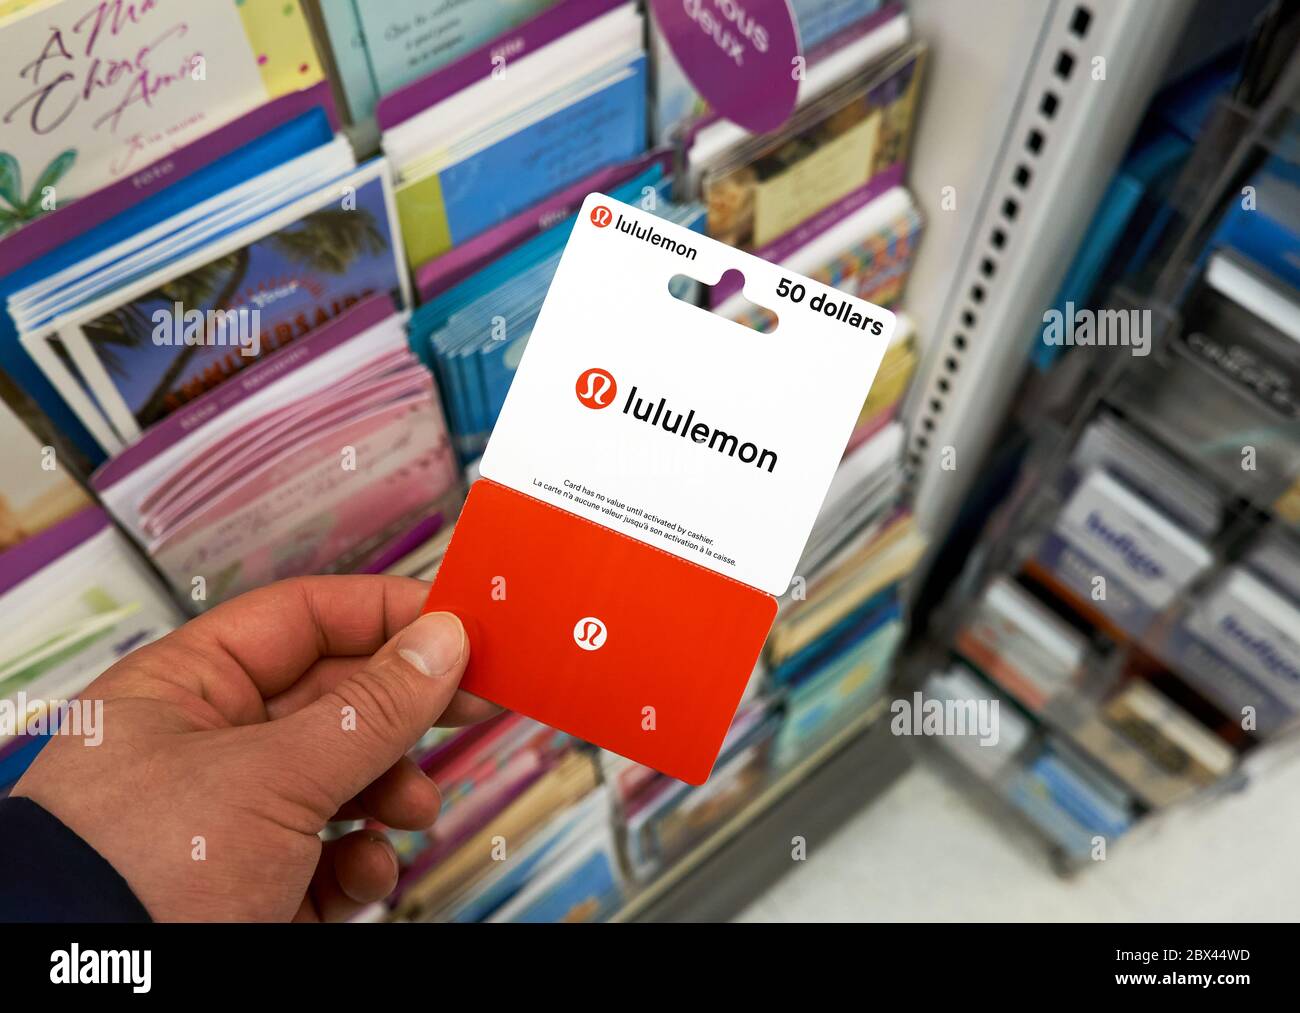 where can you buy a lululemon gift card